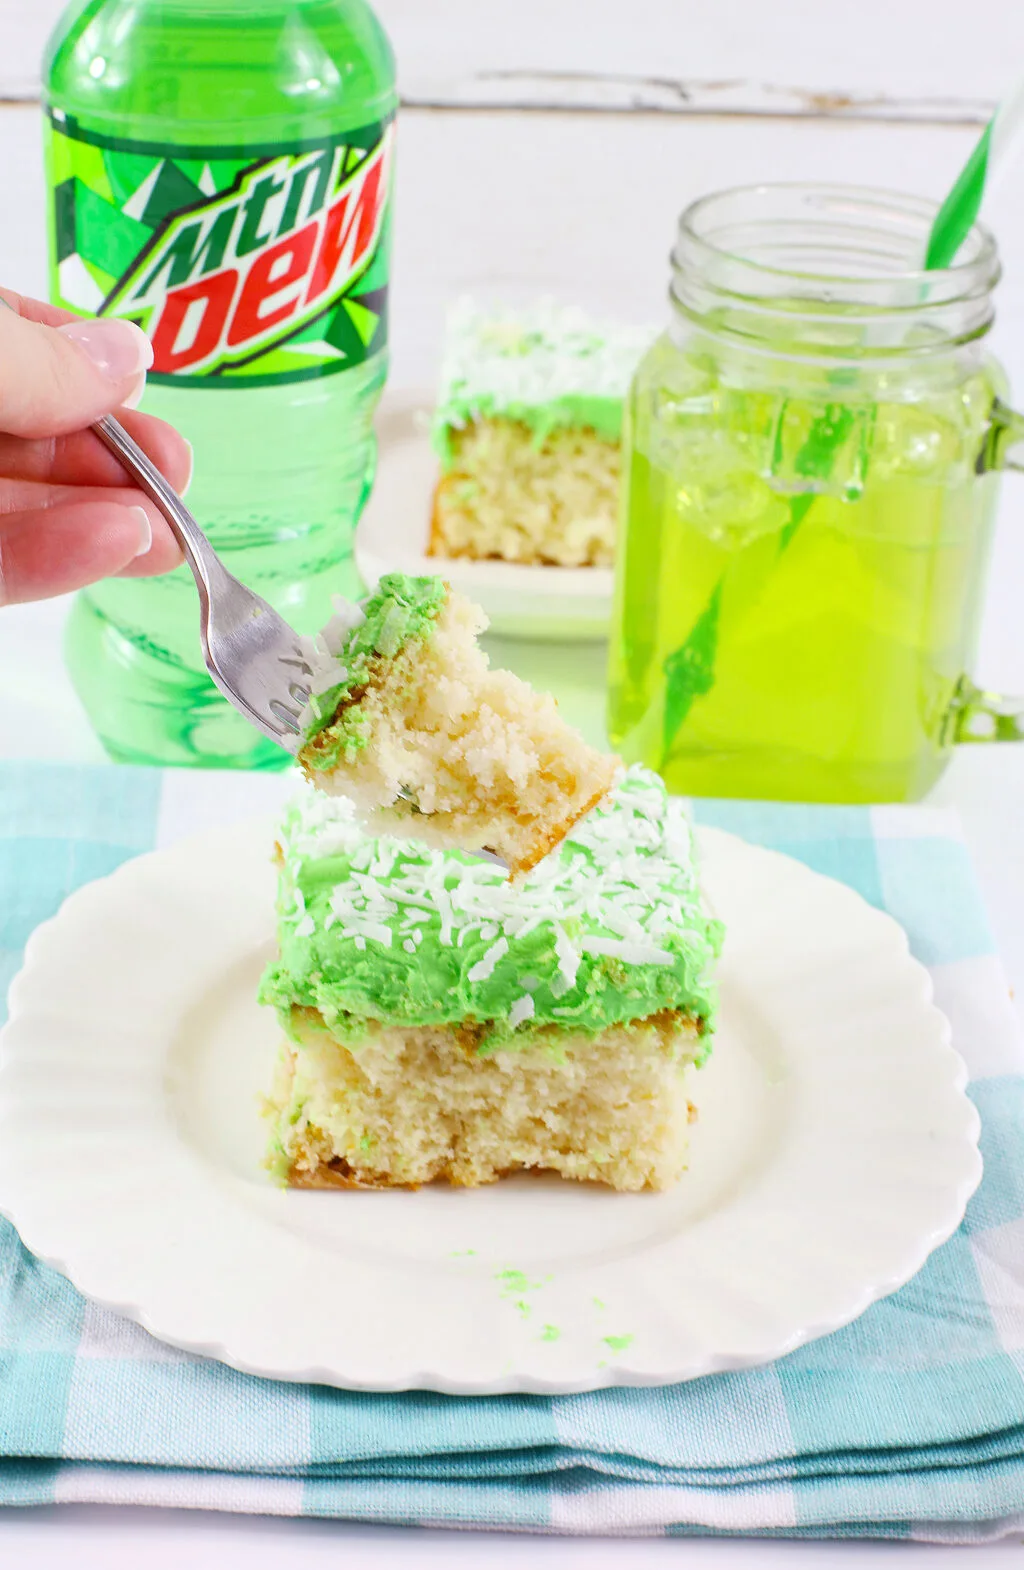 woman's hand holding fork with a bite of mountain dew cake on it